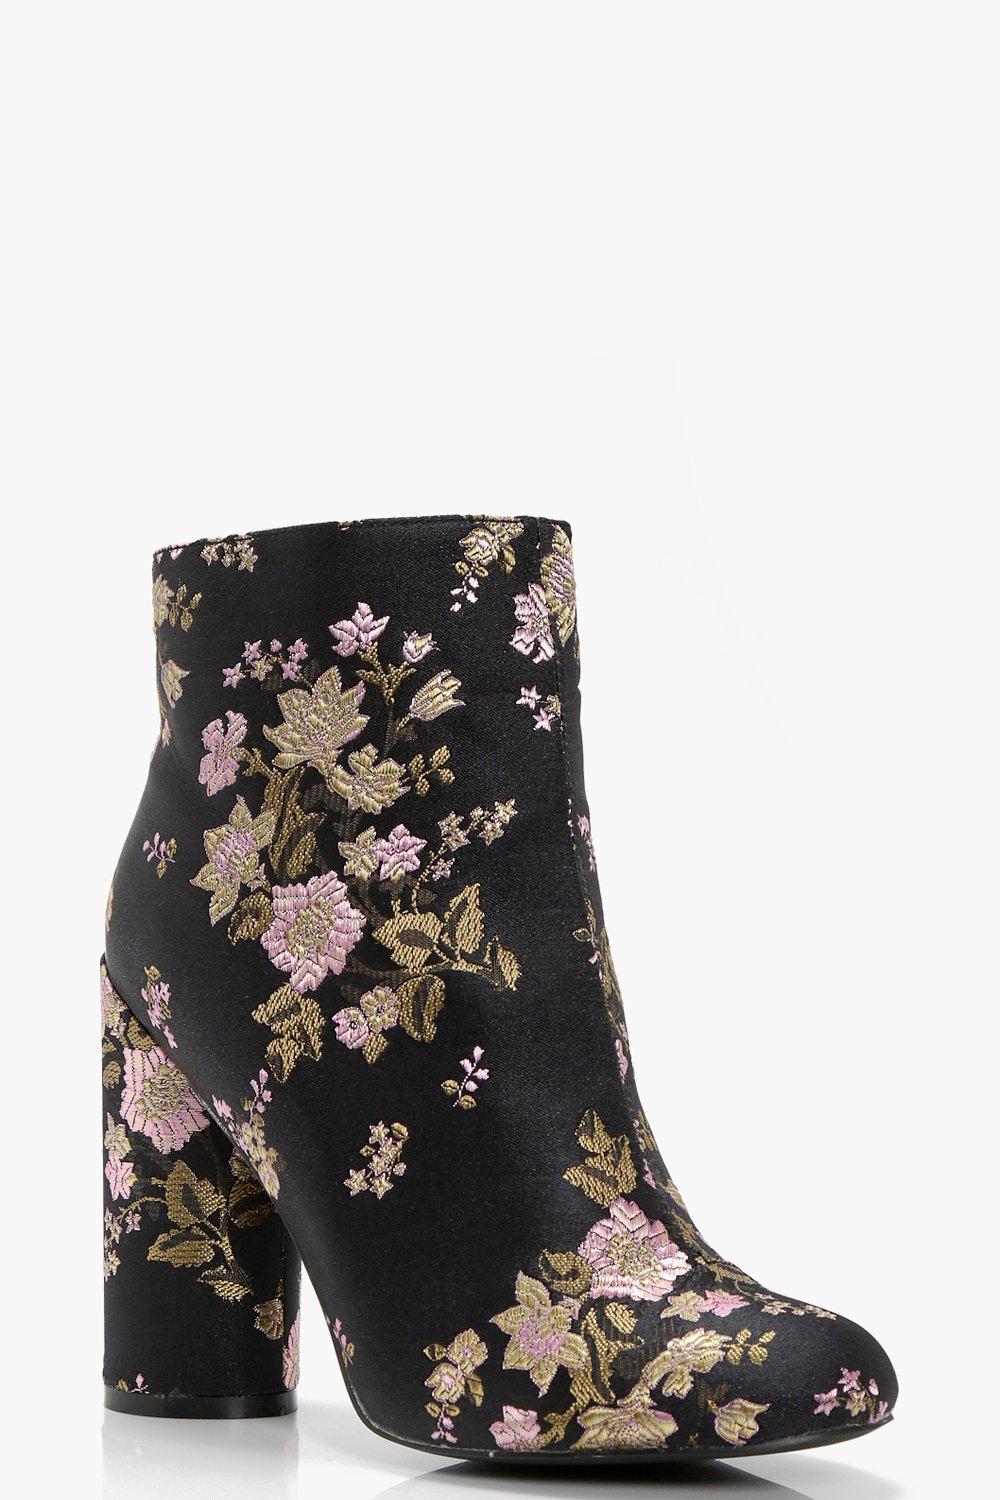 Floral Embroidered Cylinder Heel Boots 